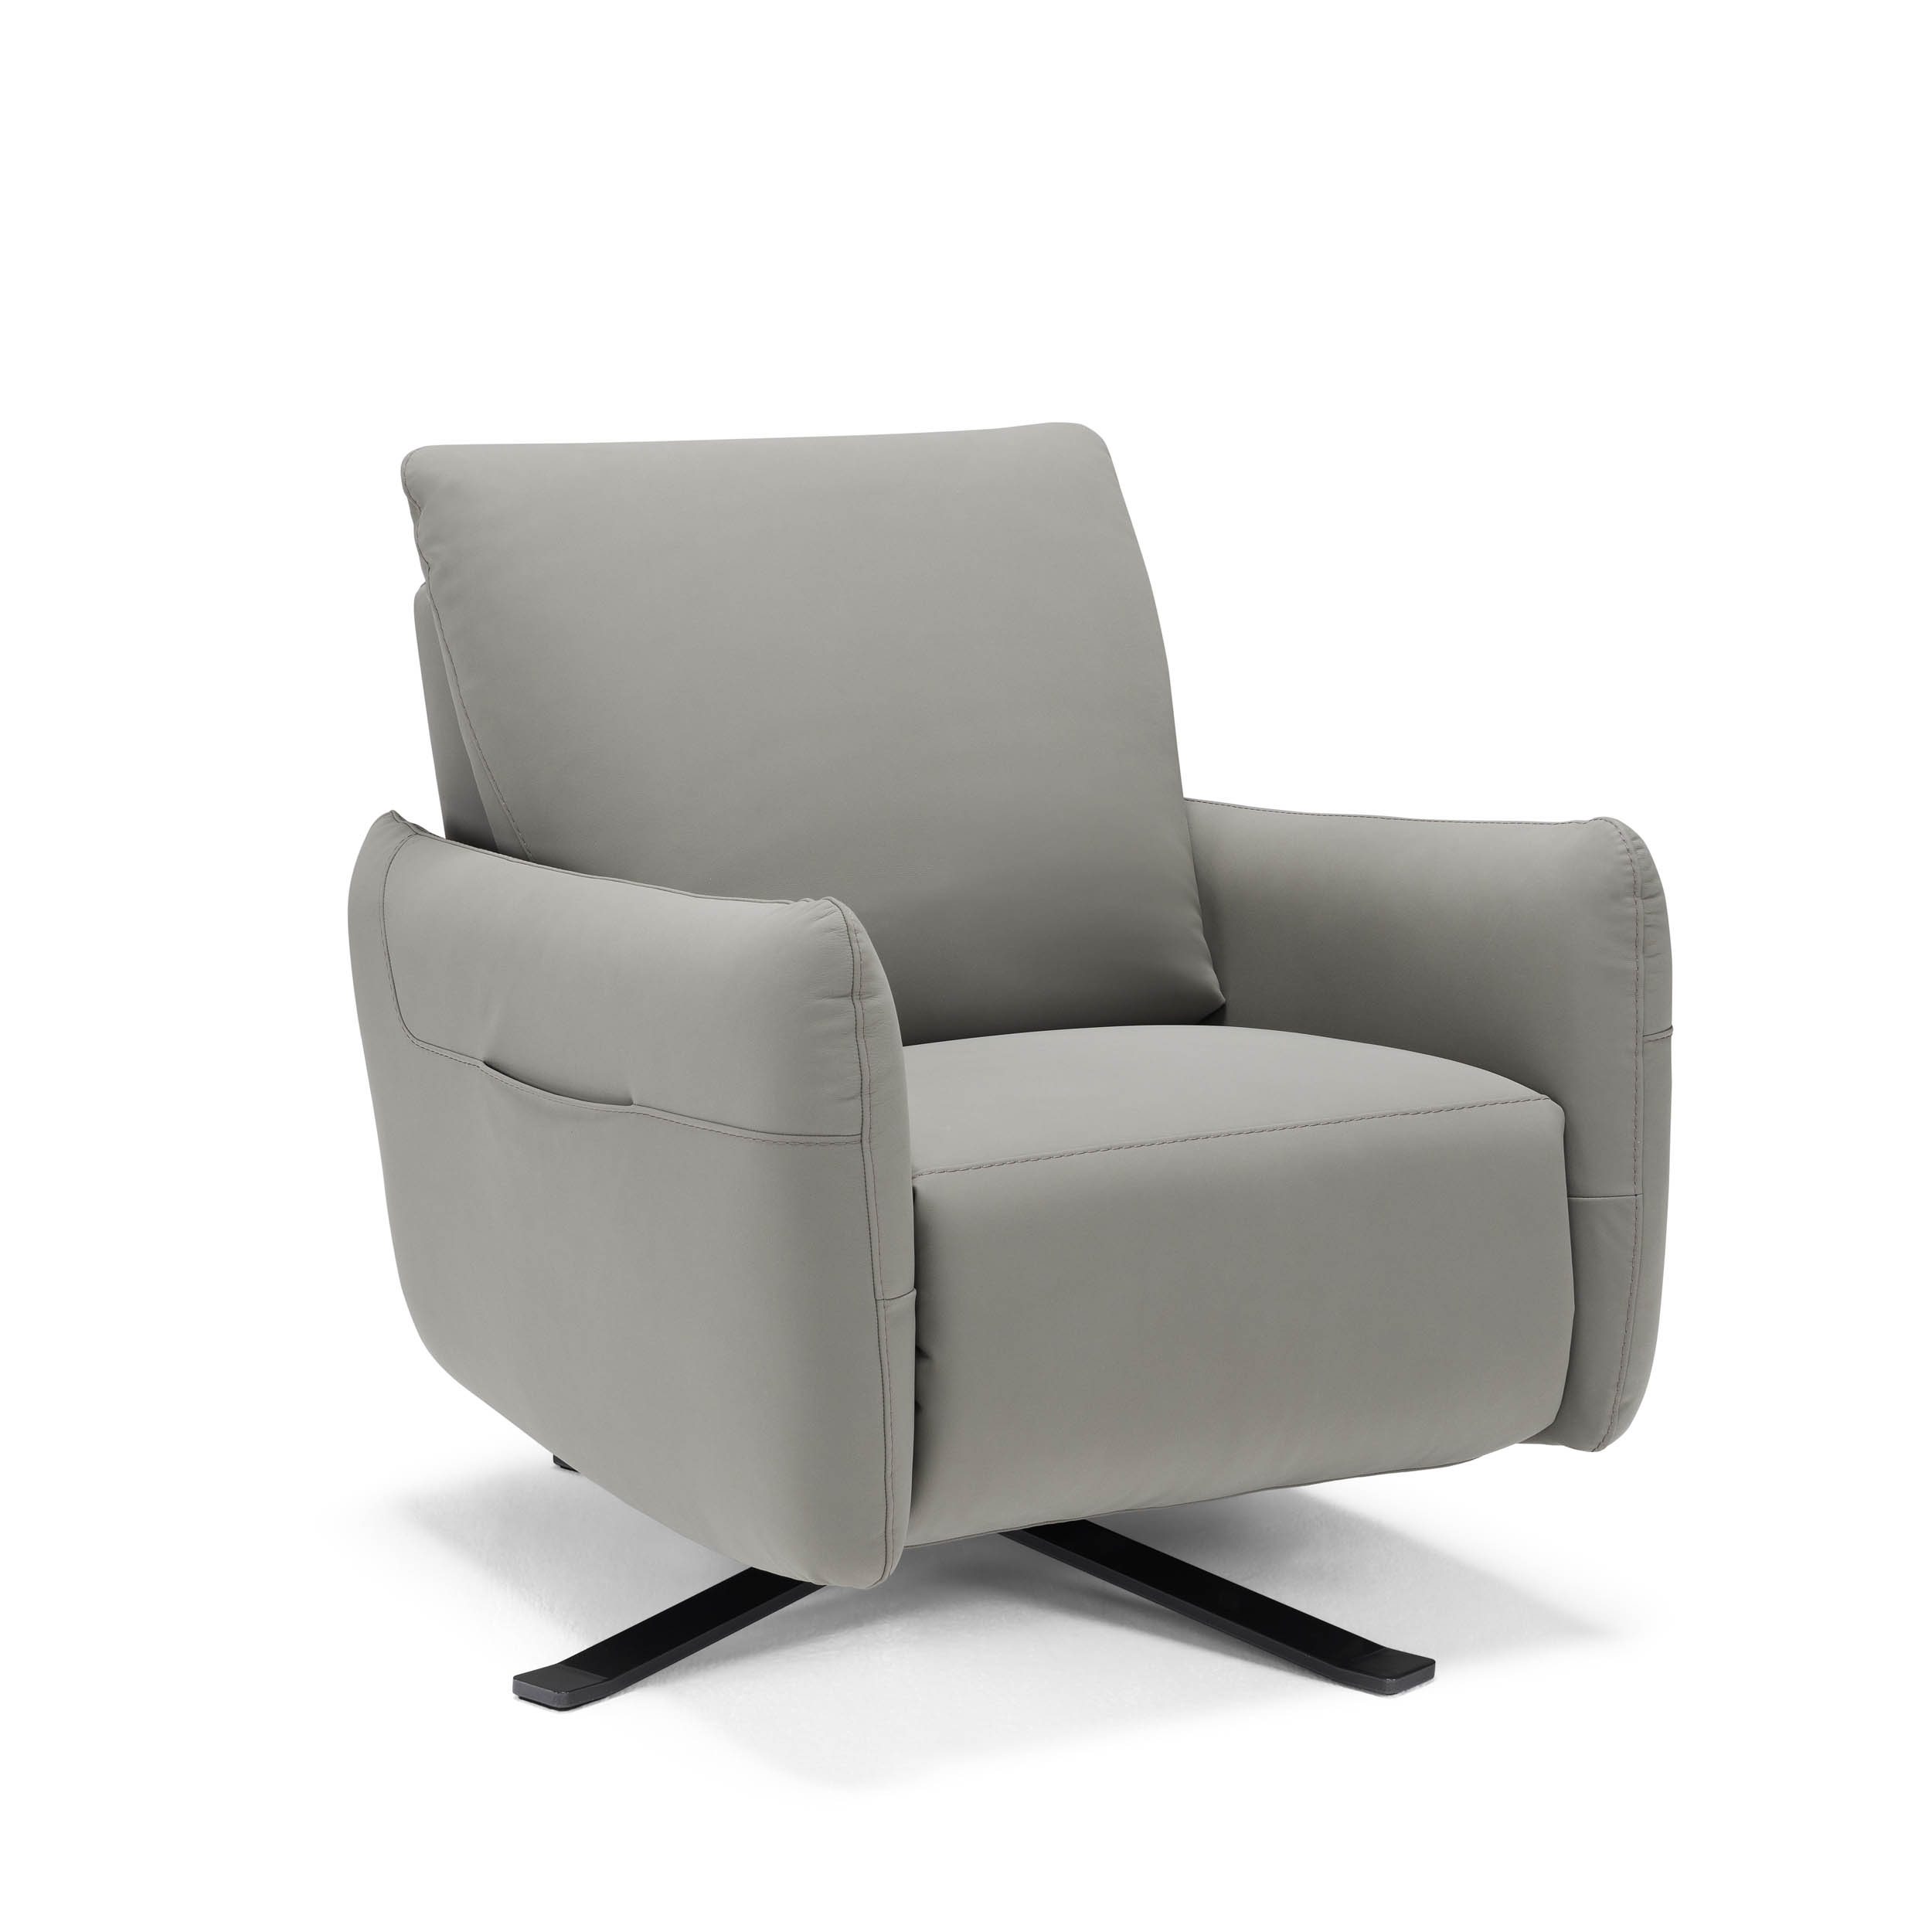 Swivel chair that turns into a recliner